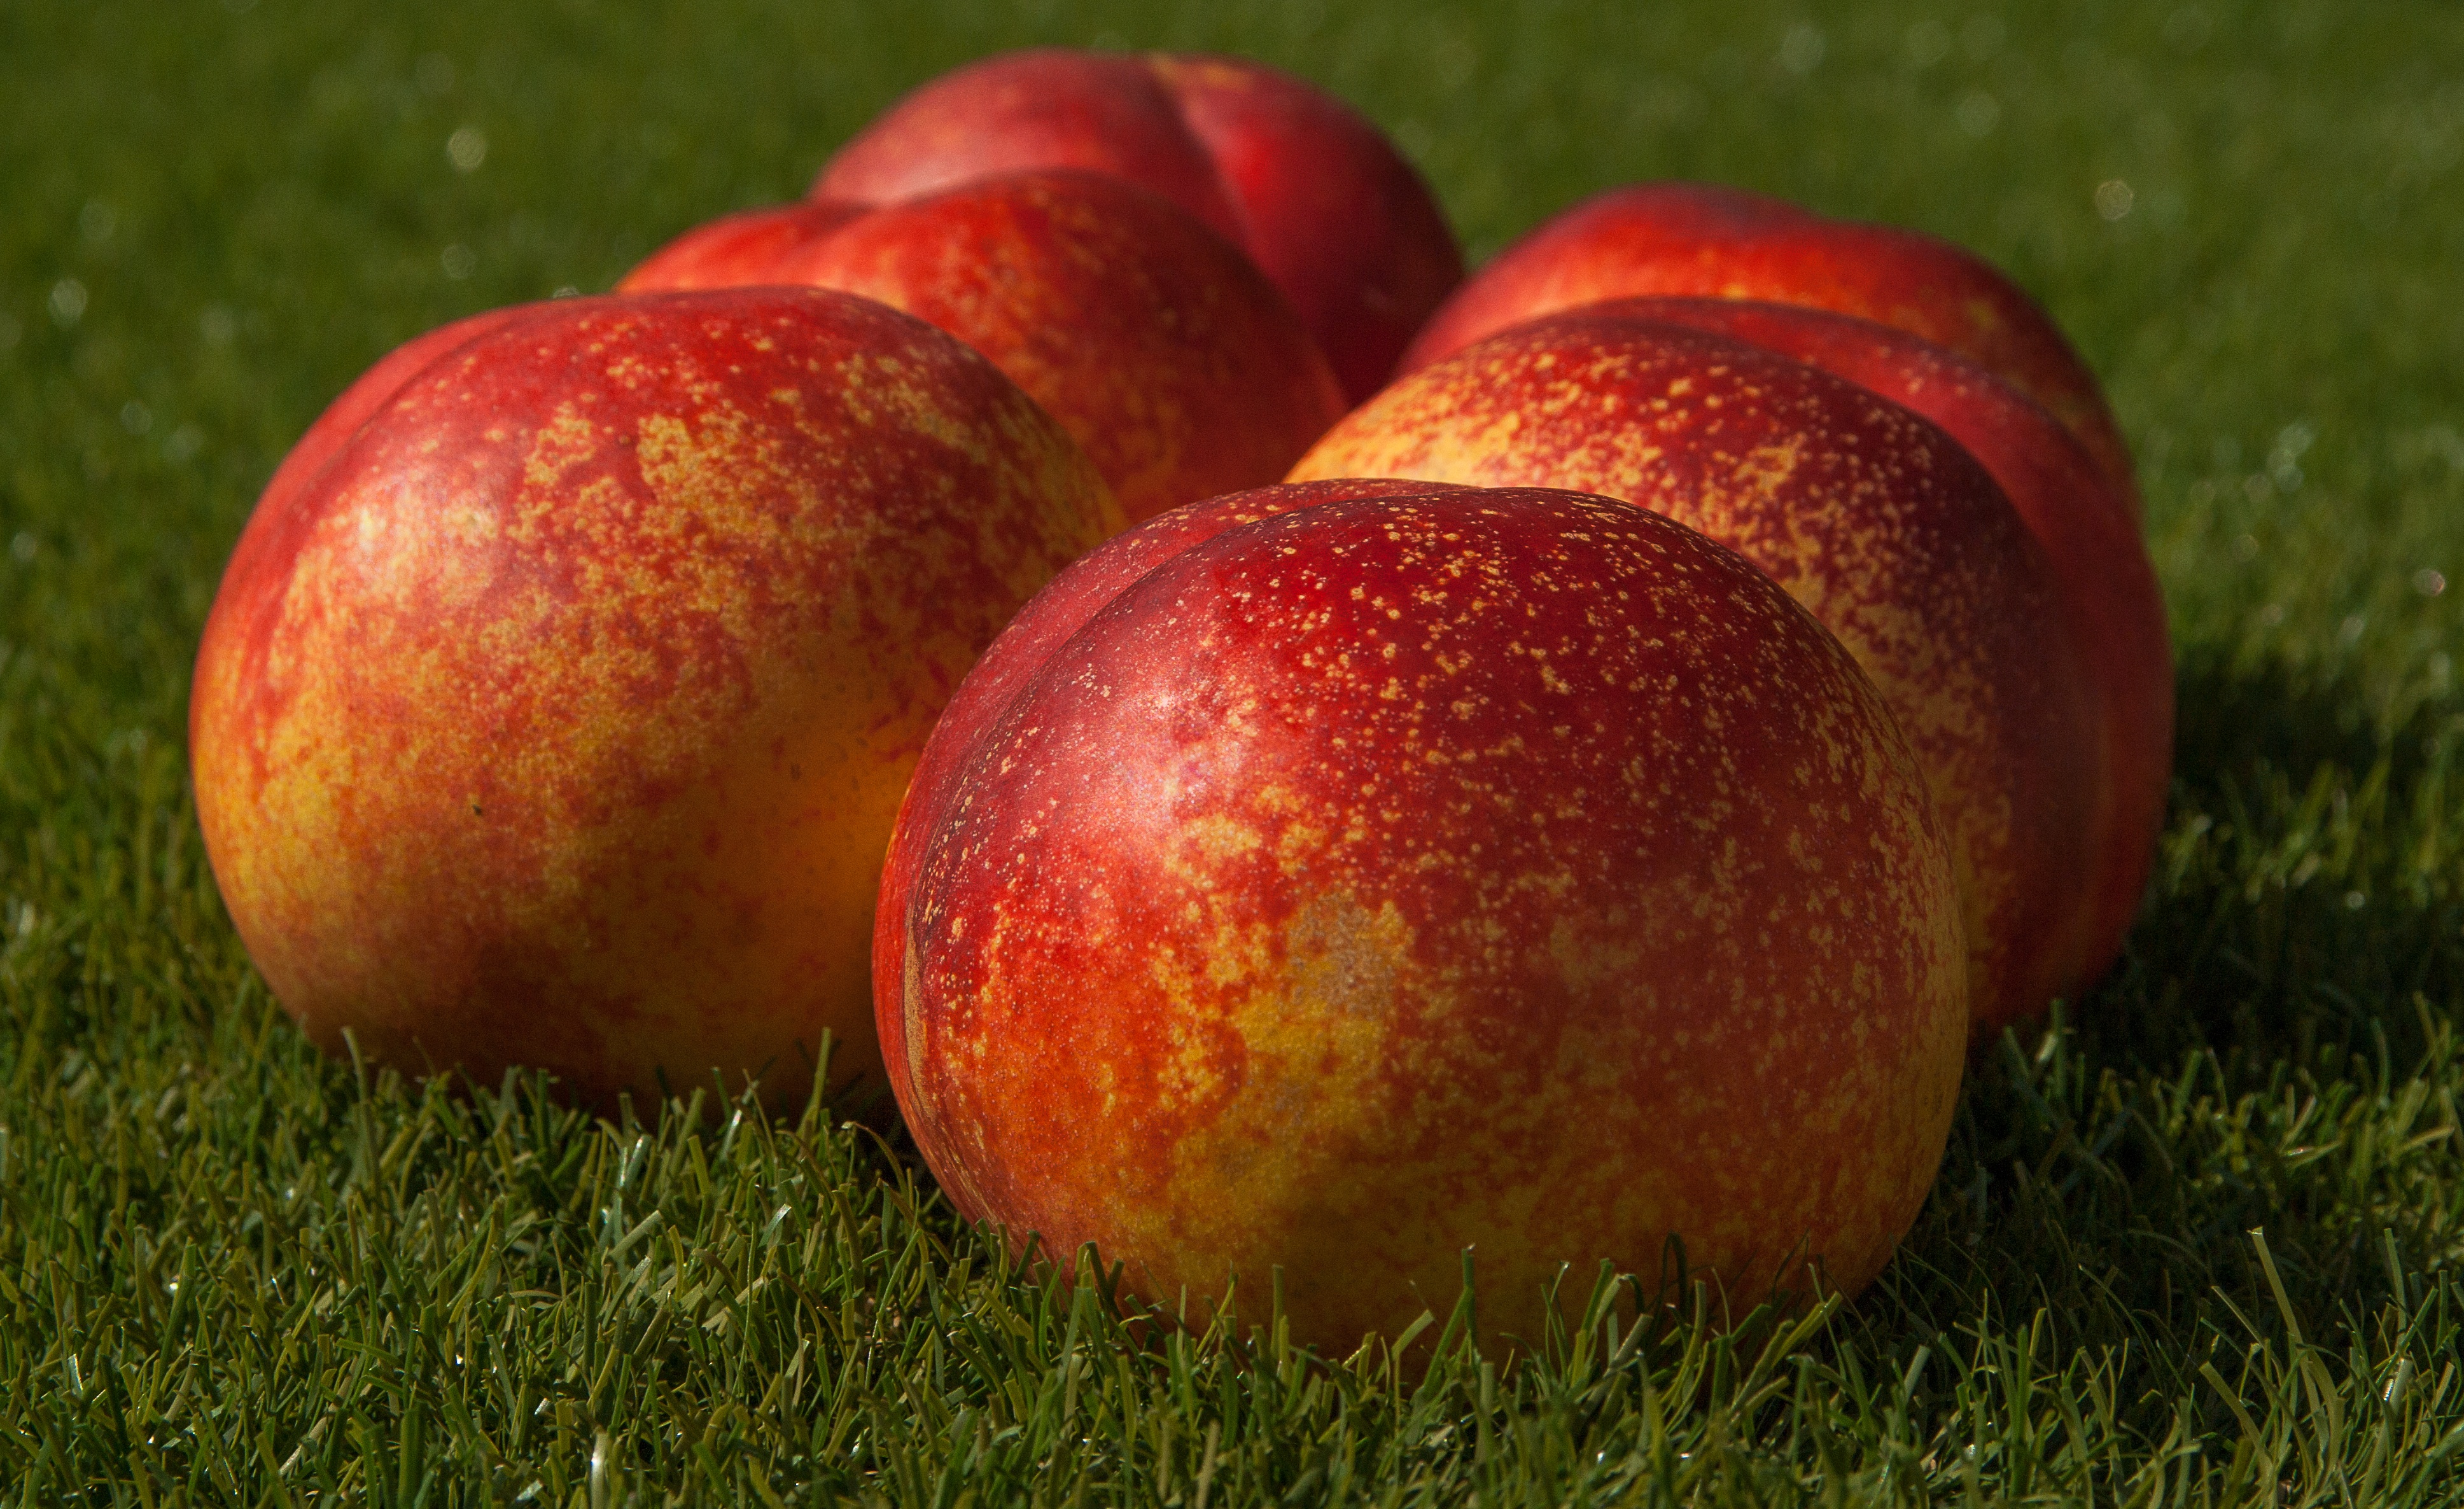 70320 download wallpaper fruits, food, peaches, ripe screensavers and pictures for free